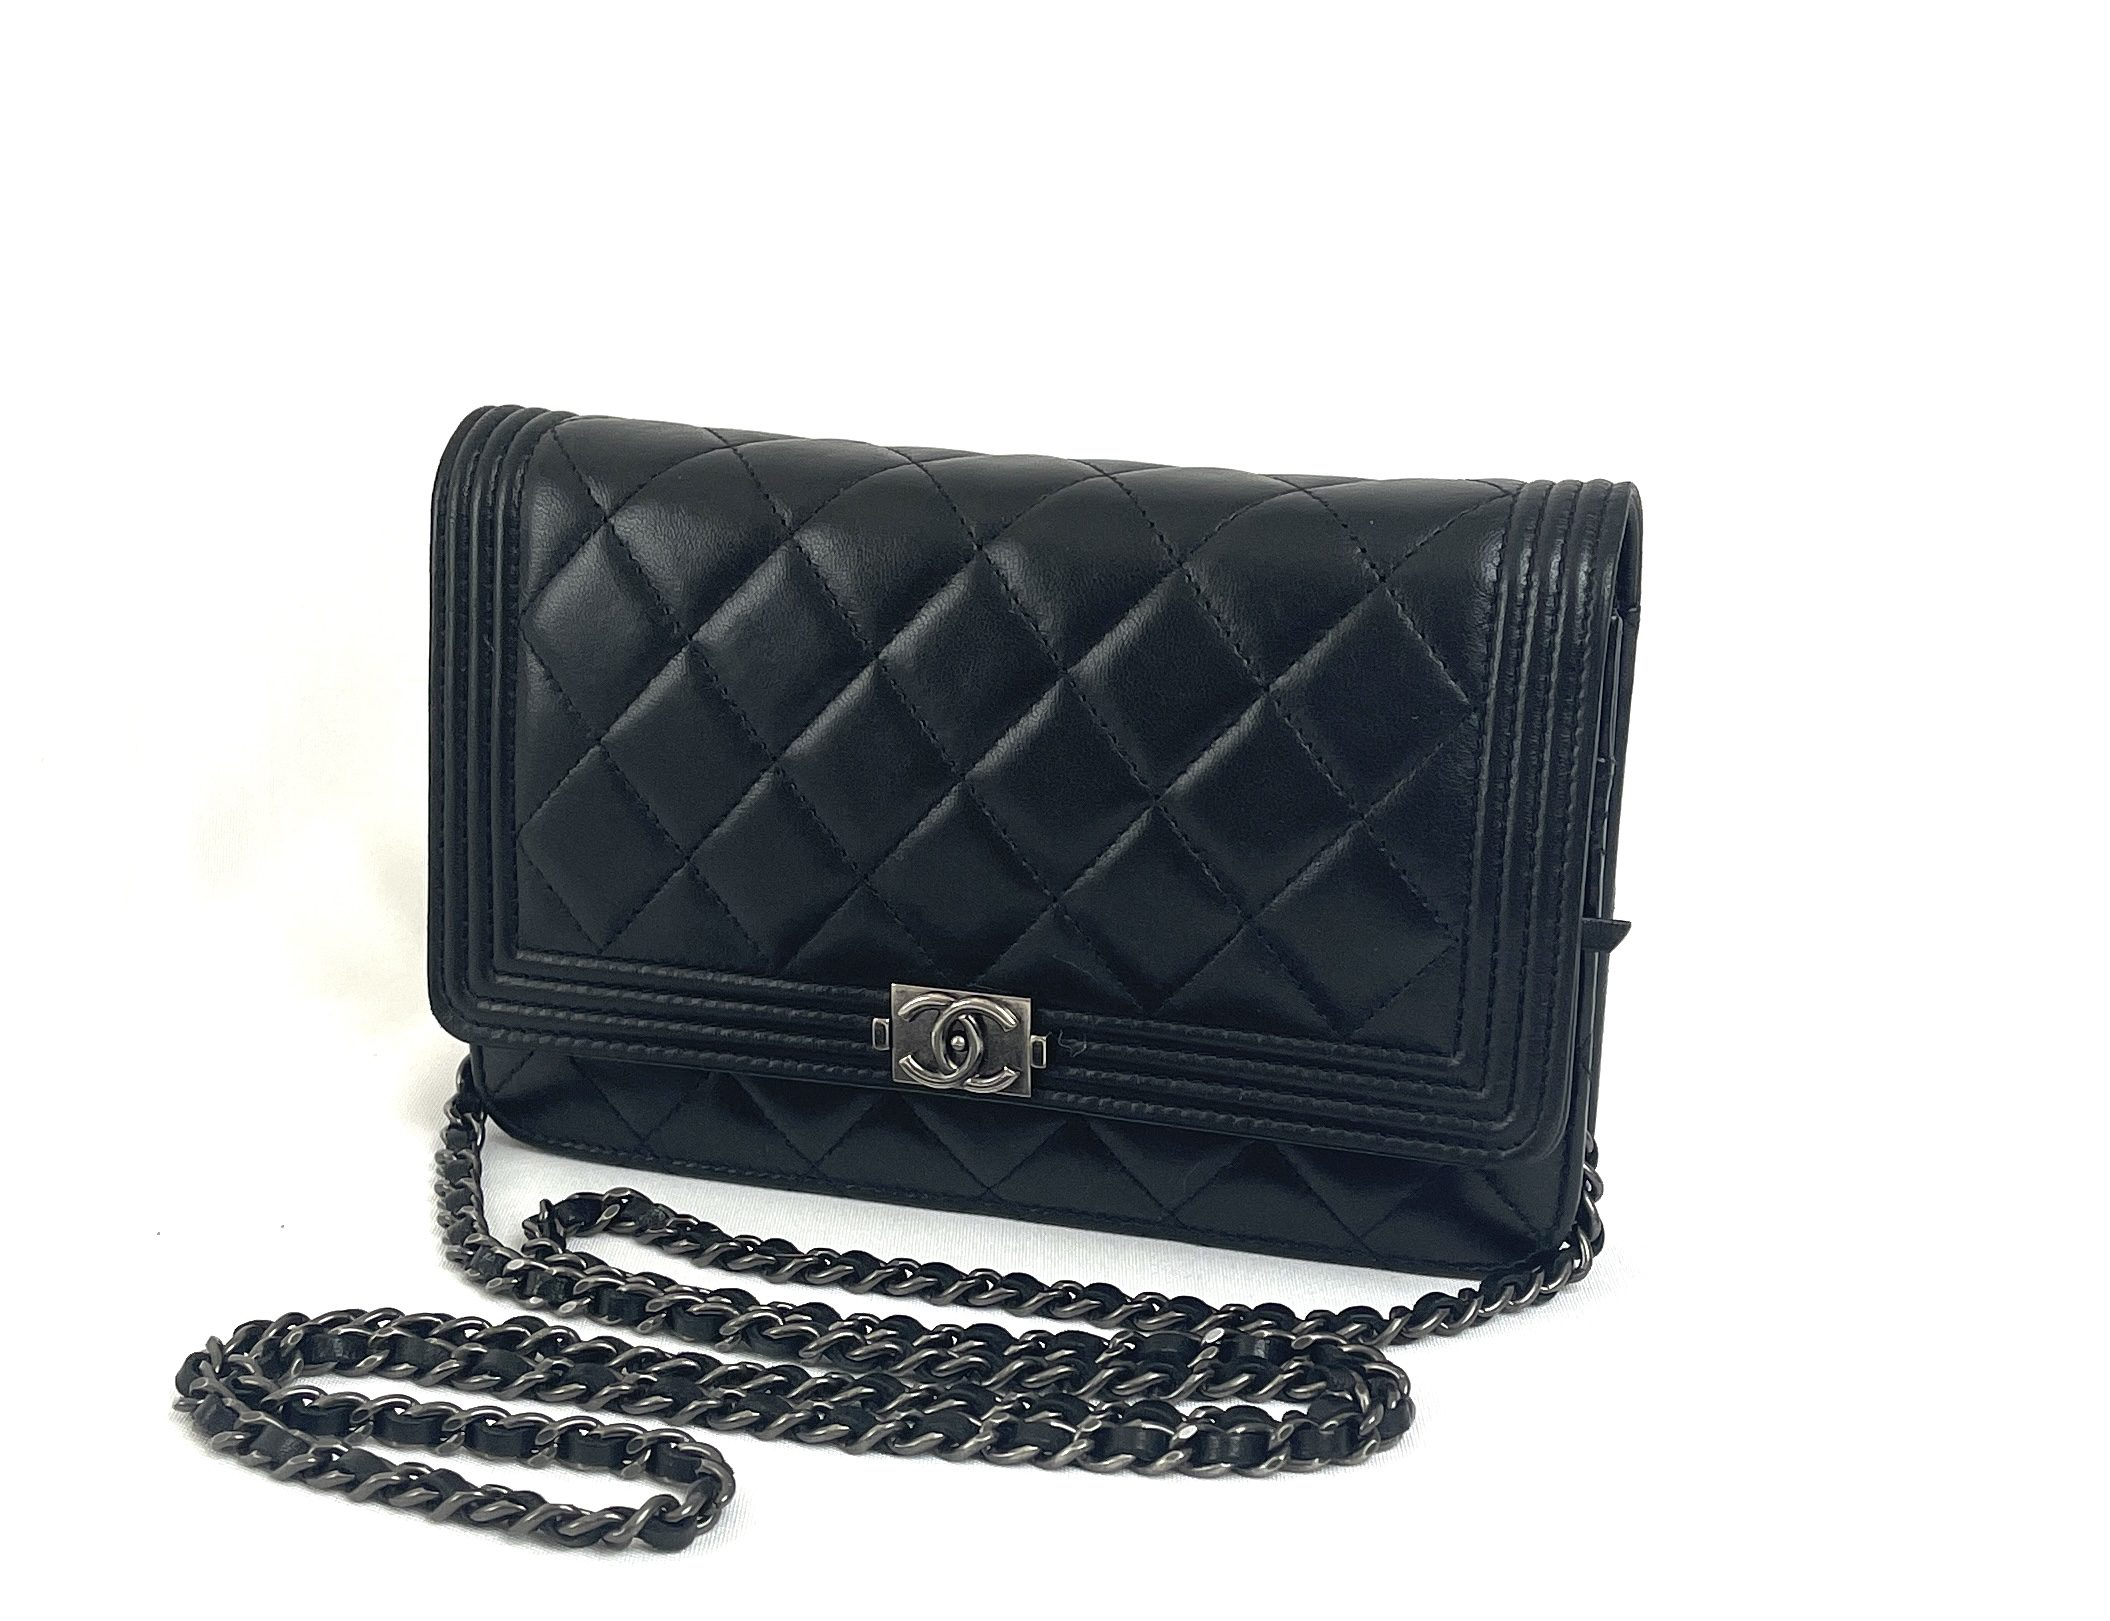 Chanel Black Lambskin Bag - Quilted Leather Boy WOC - A World Of